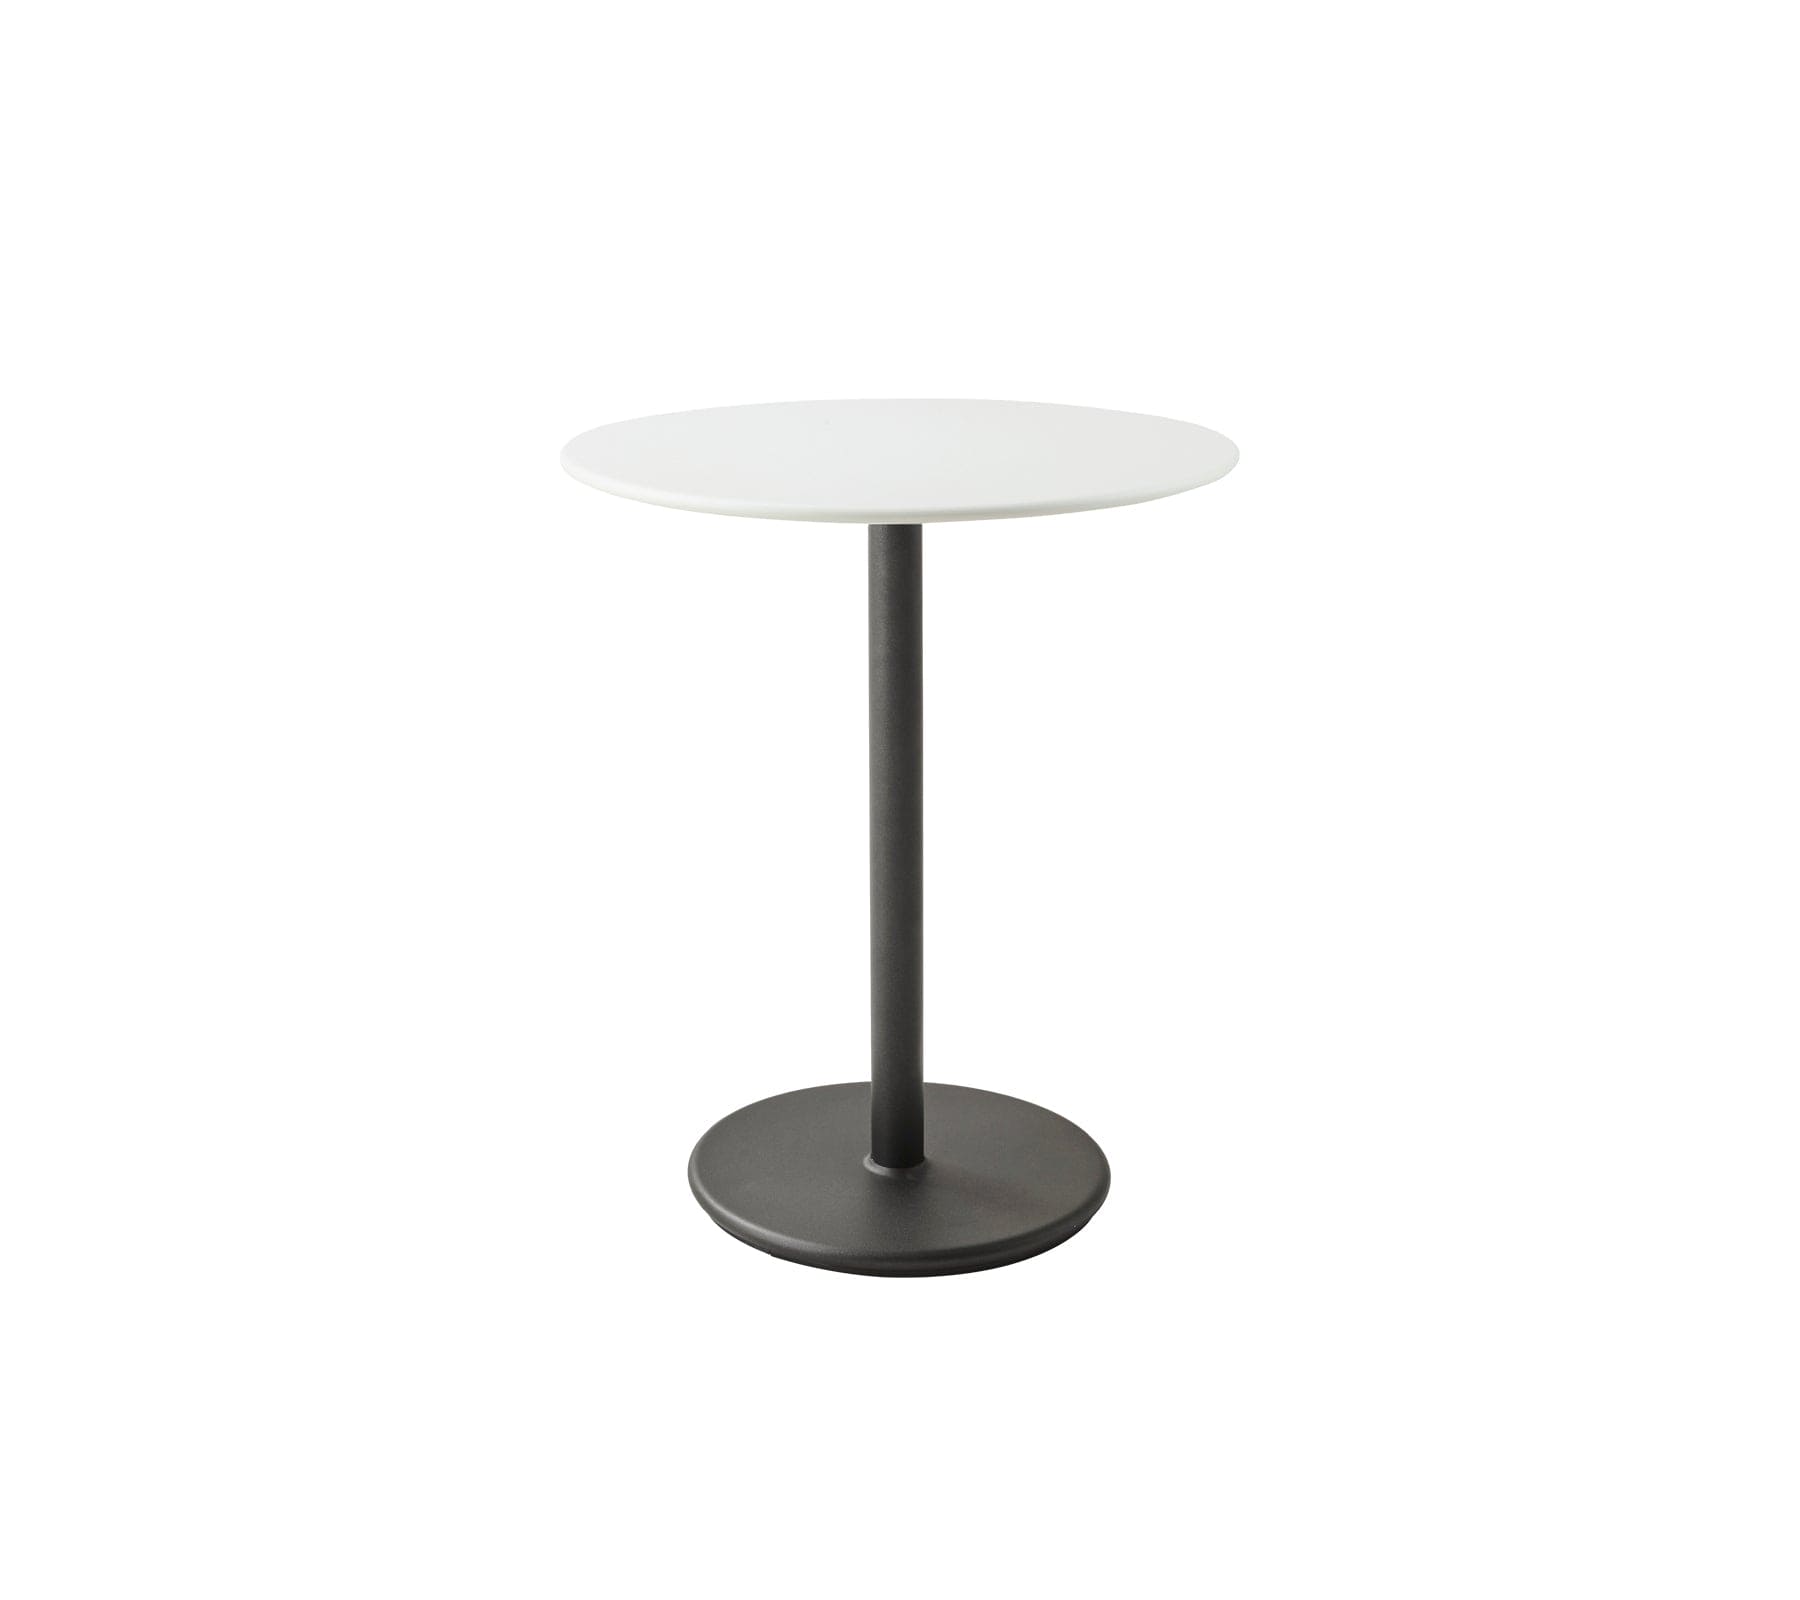 Boxhill's Go Outdoor Round Cafe Table White Aluminum Top